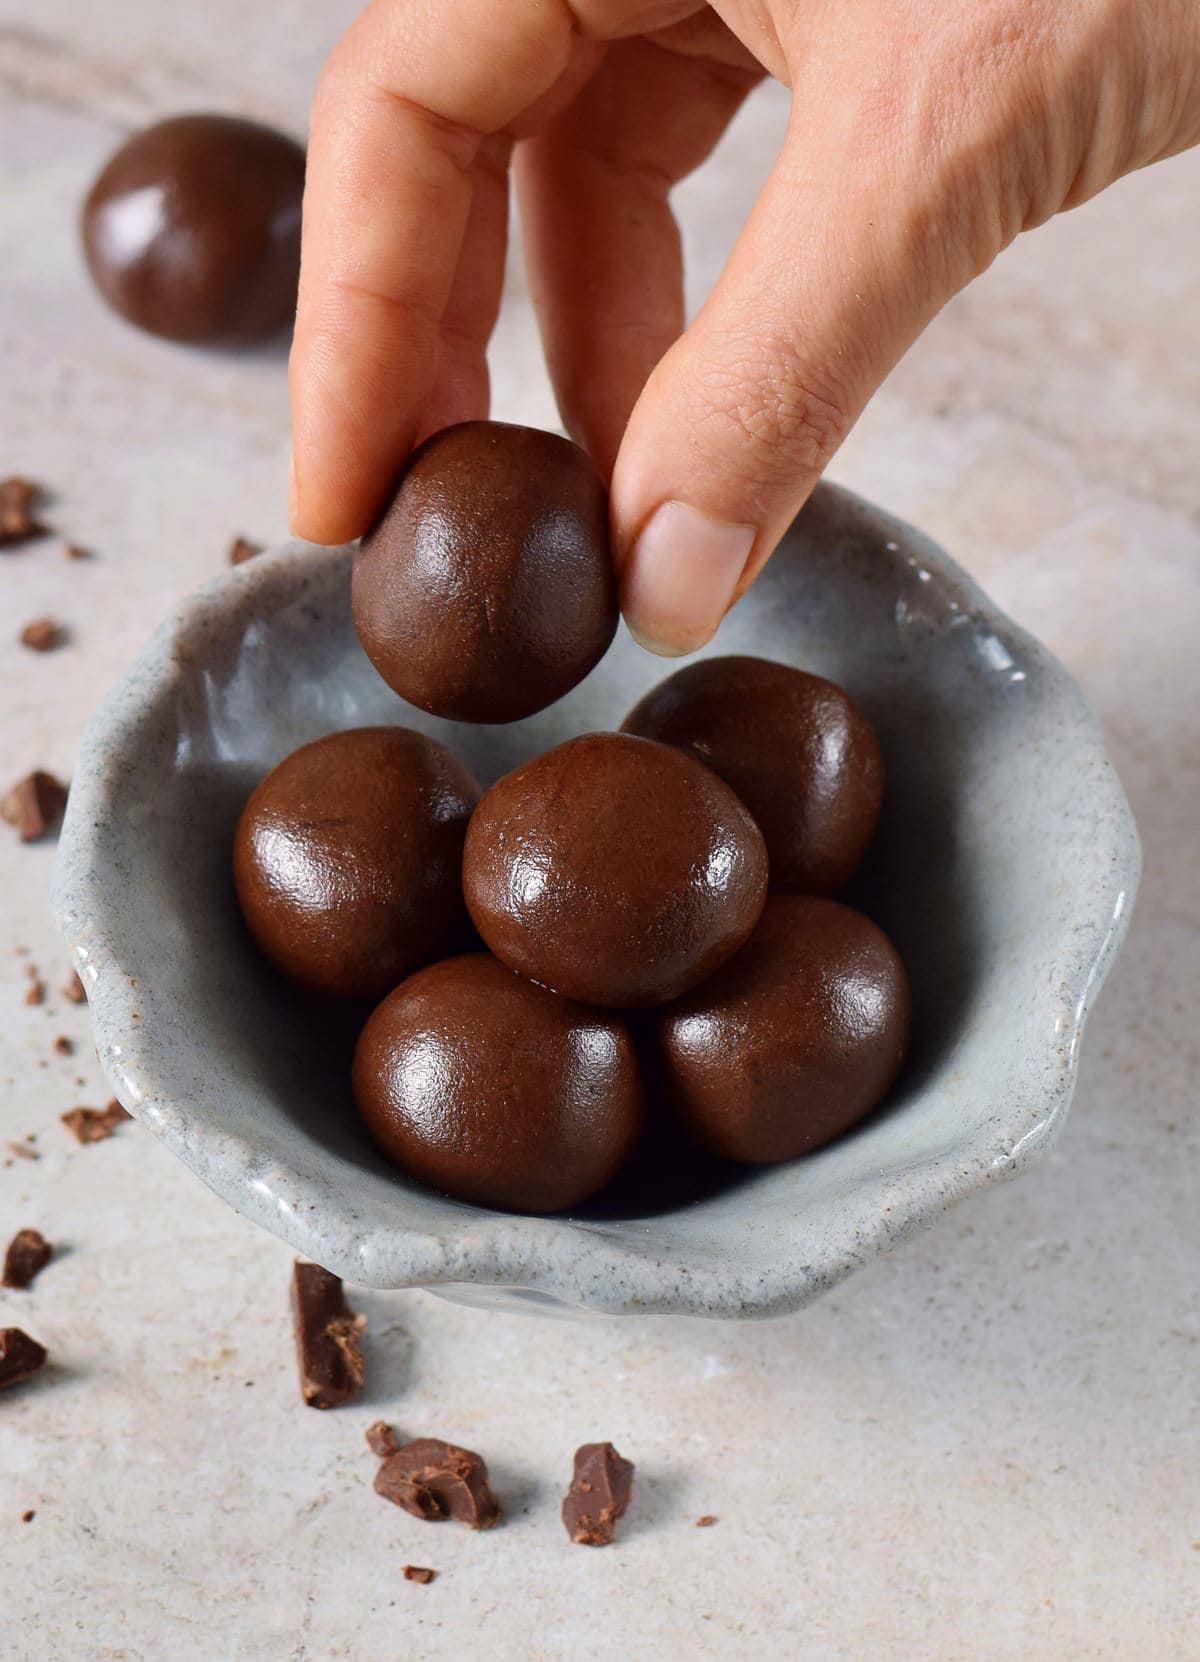 hand grabbing a chocolate fat bomb truffle from a bowl